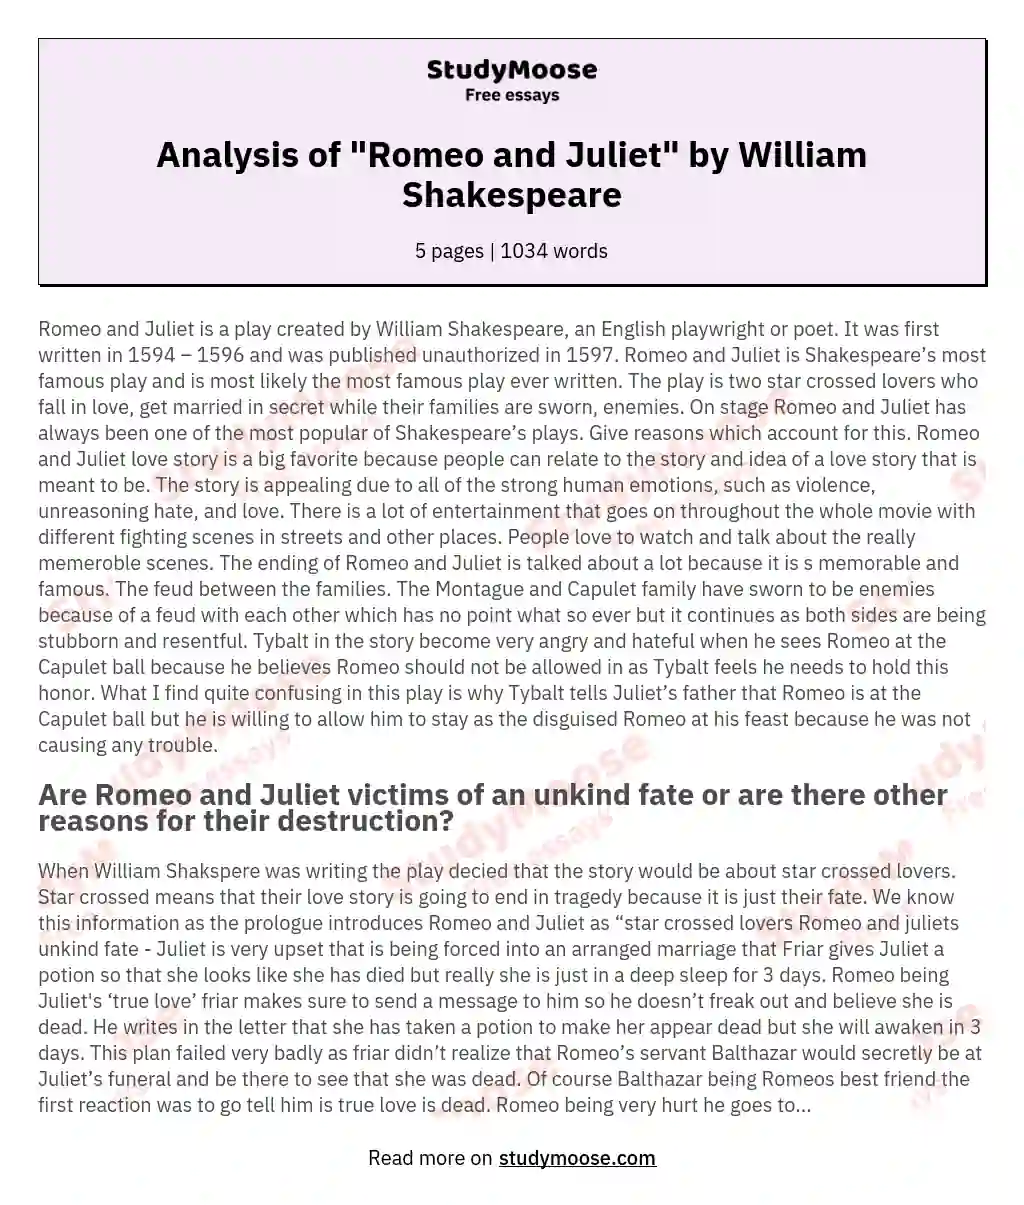 Analysis of "Romeo and Juliet" by William Shakespeare essay